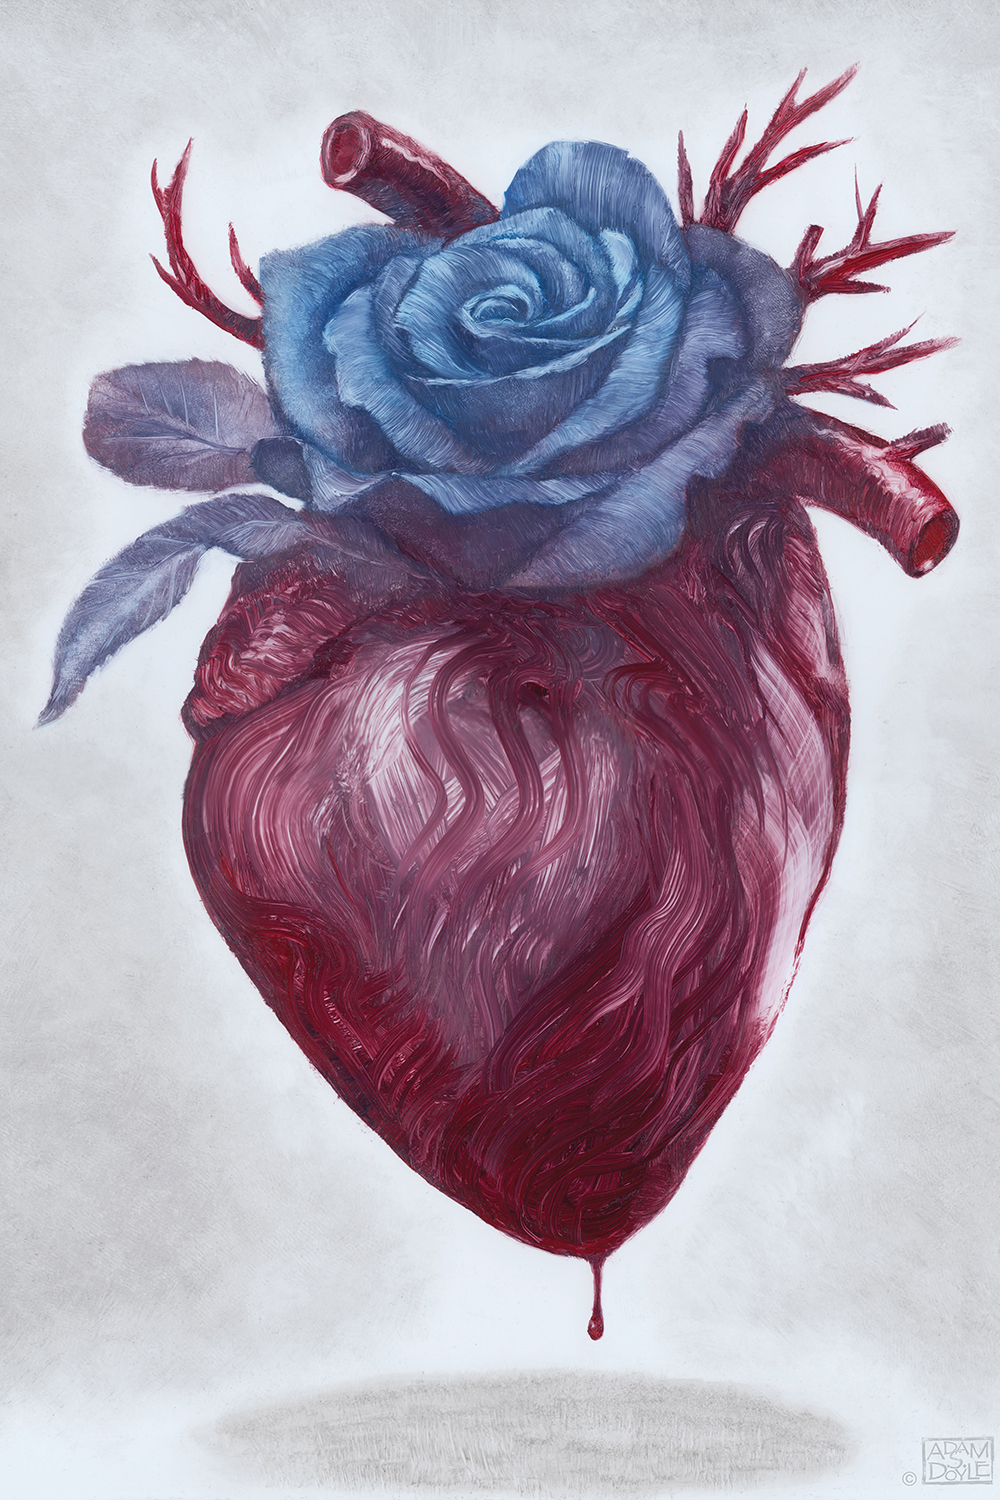 an anatomical heart dripping blood with a large blue rose